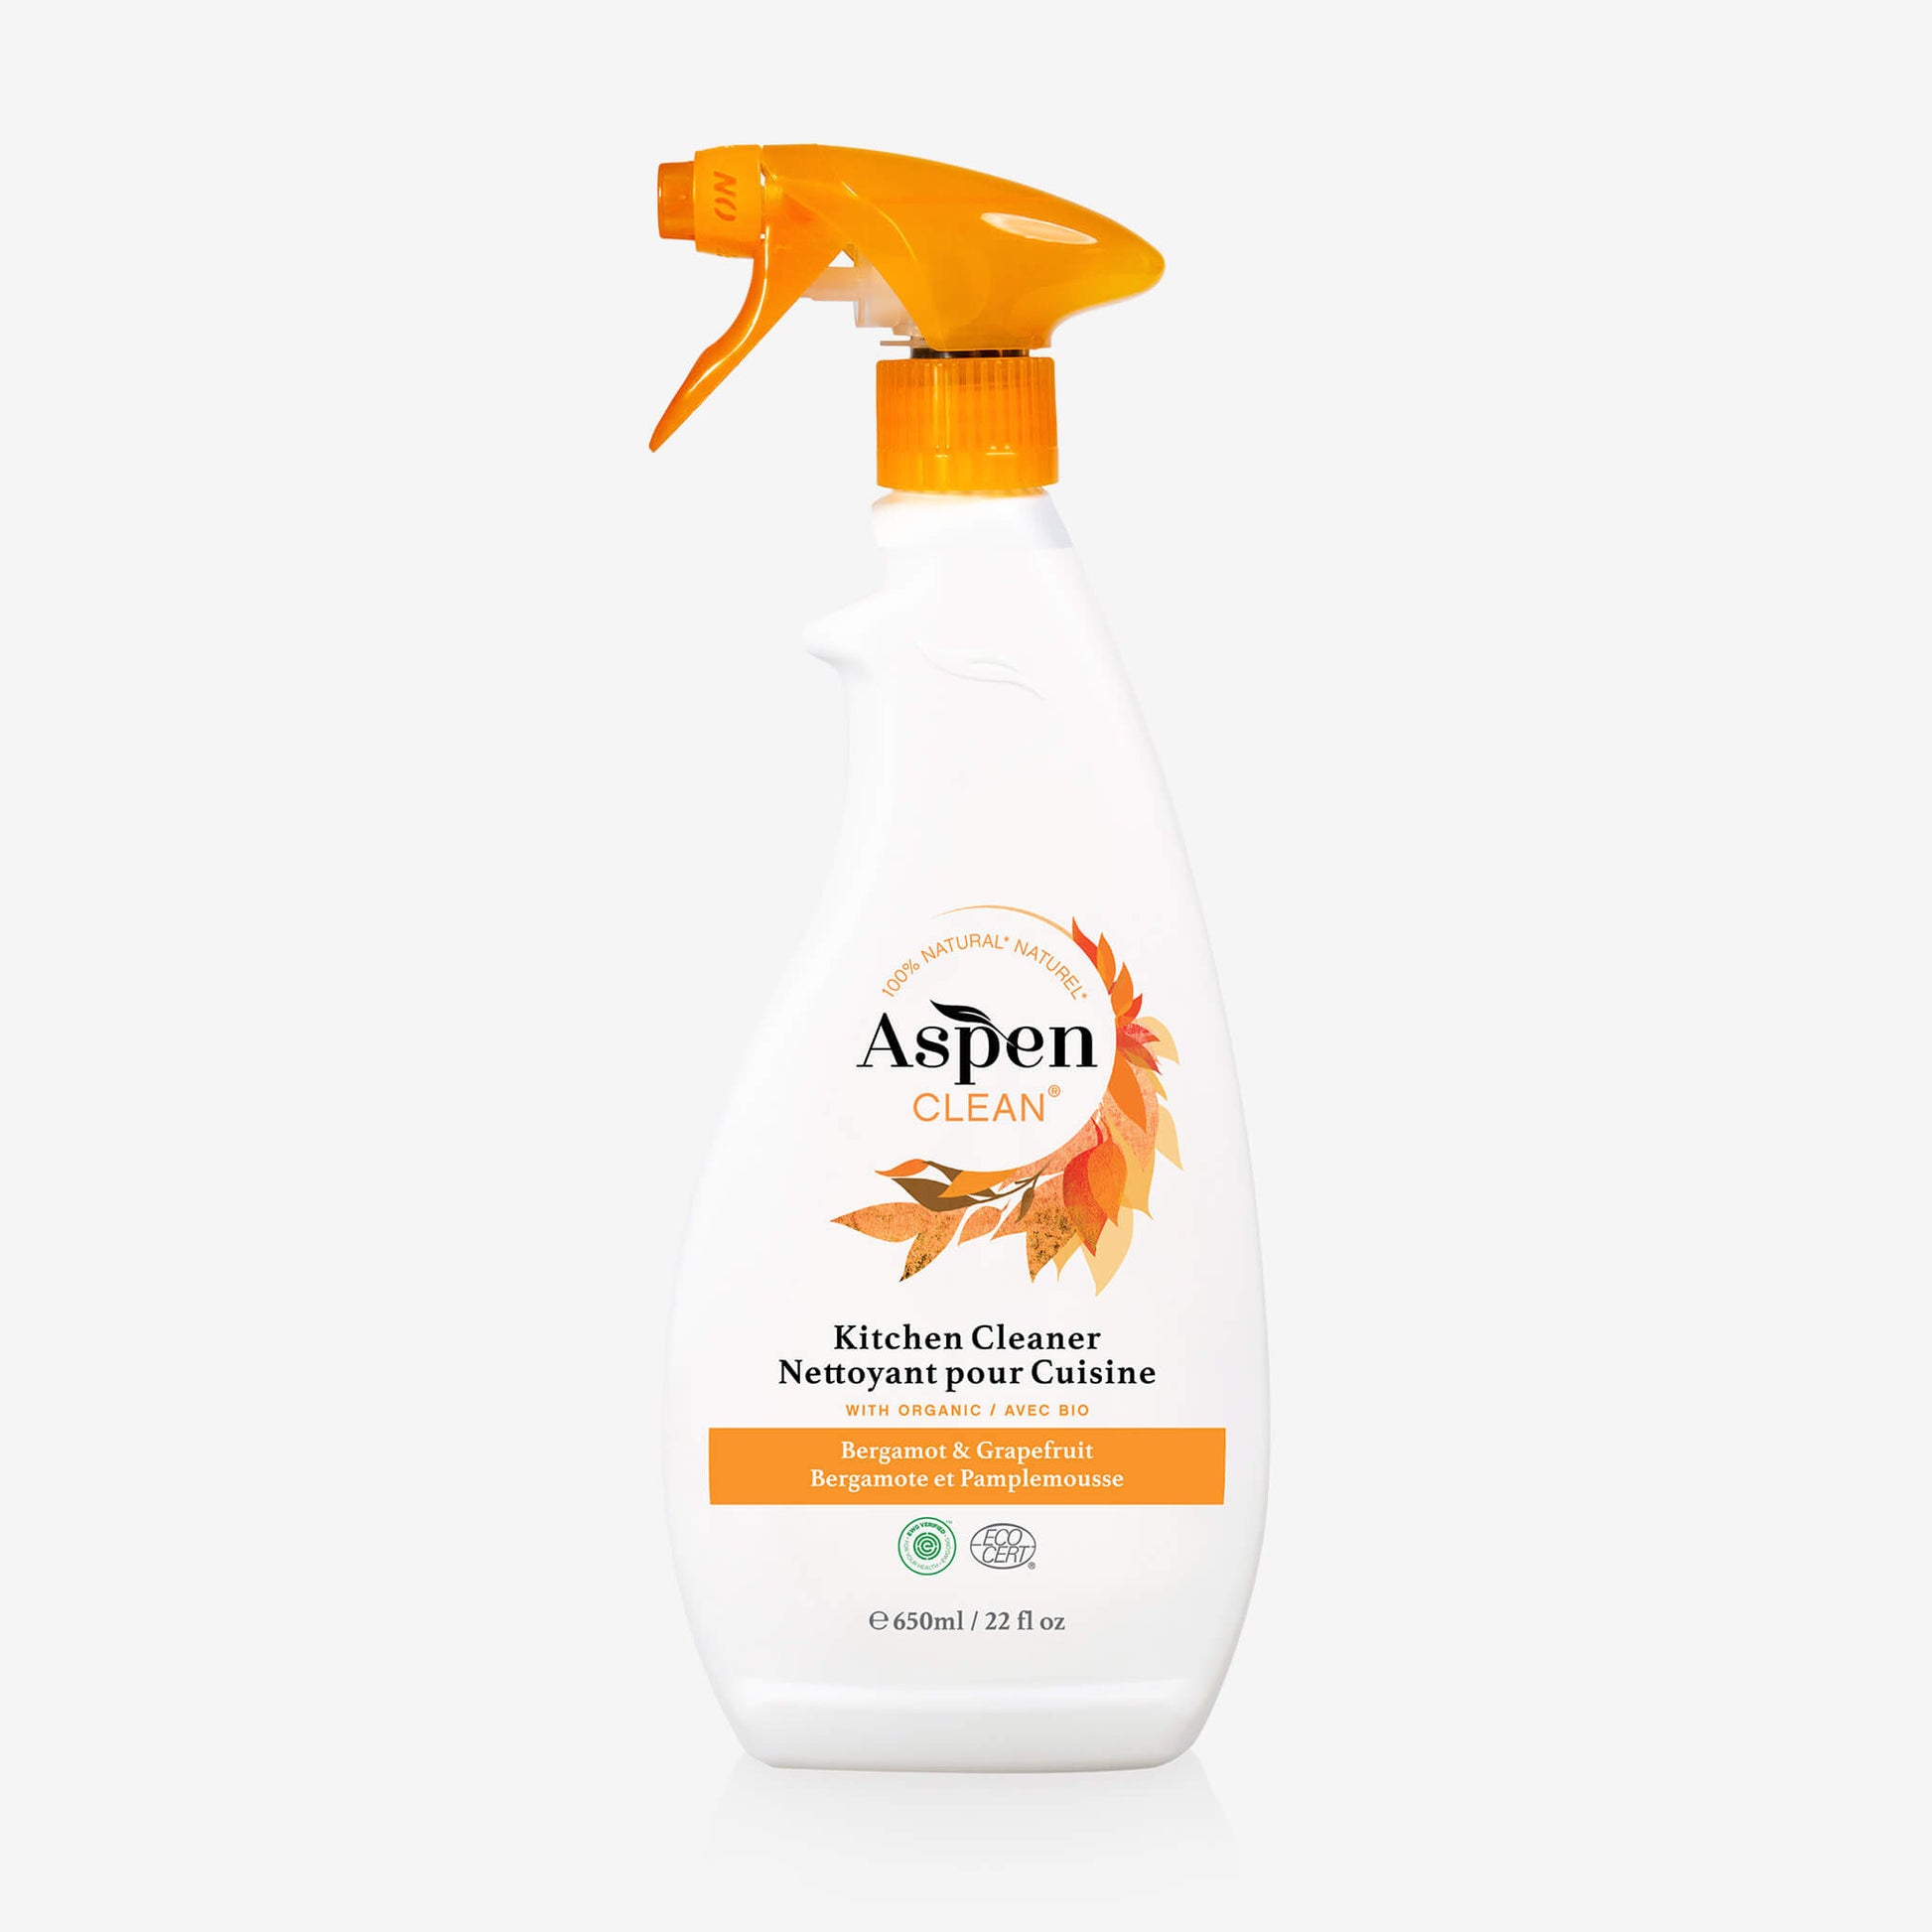 Kitchen Cleaner: Natural, Green & Eco-Friendly - AspenClean